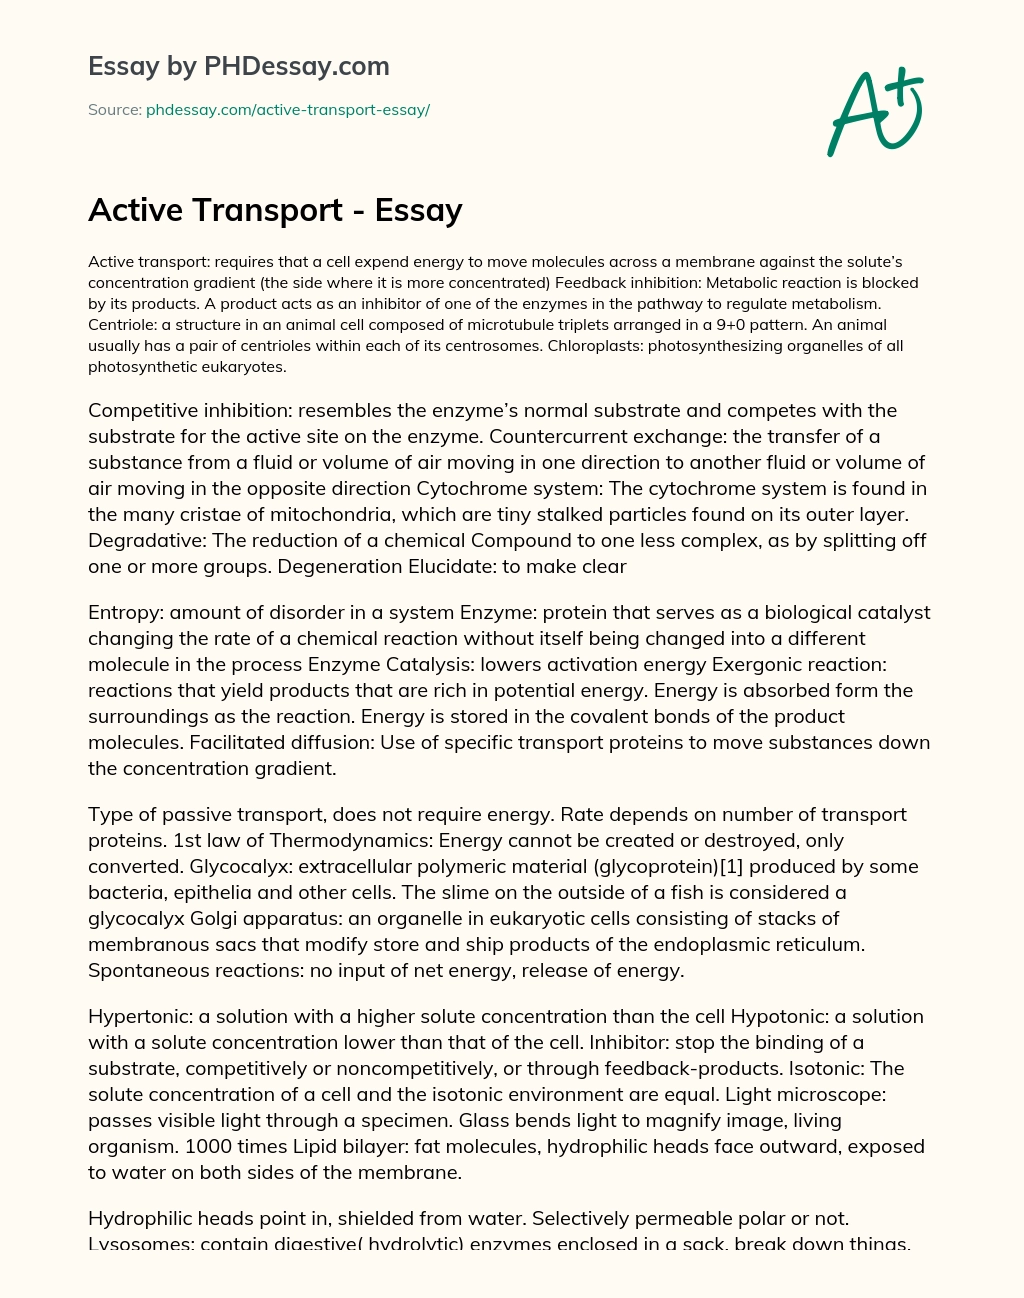 Реферат: Active Transport Essay Research Paper Since the